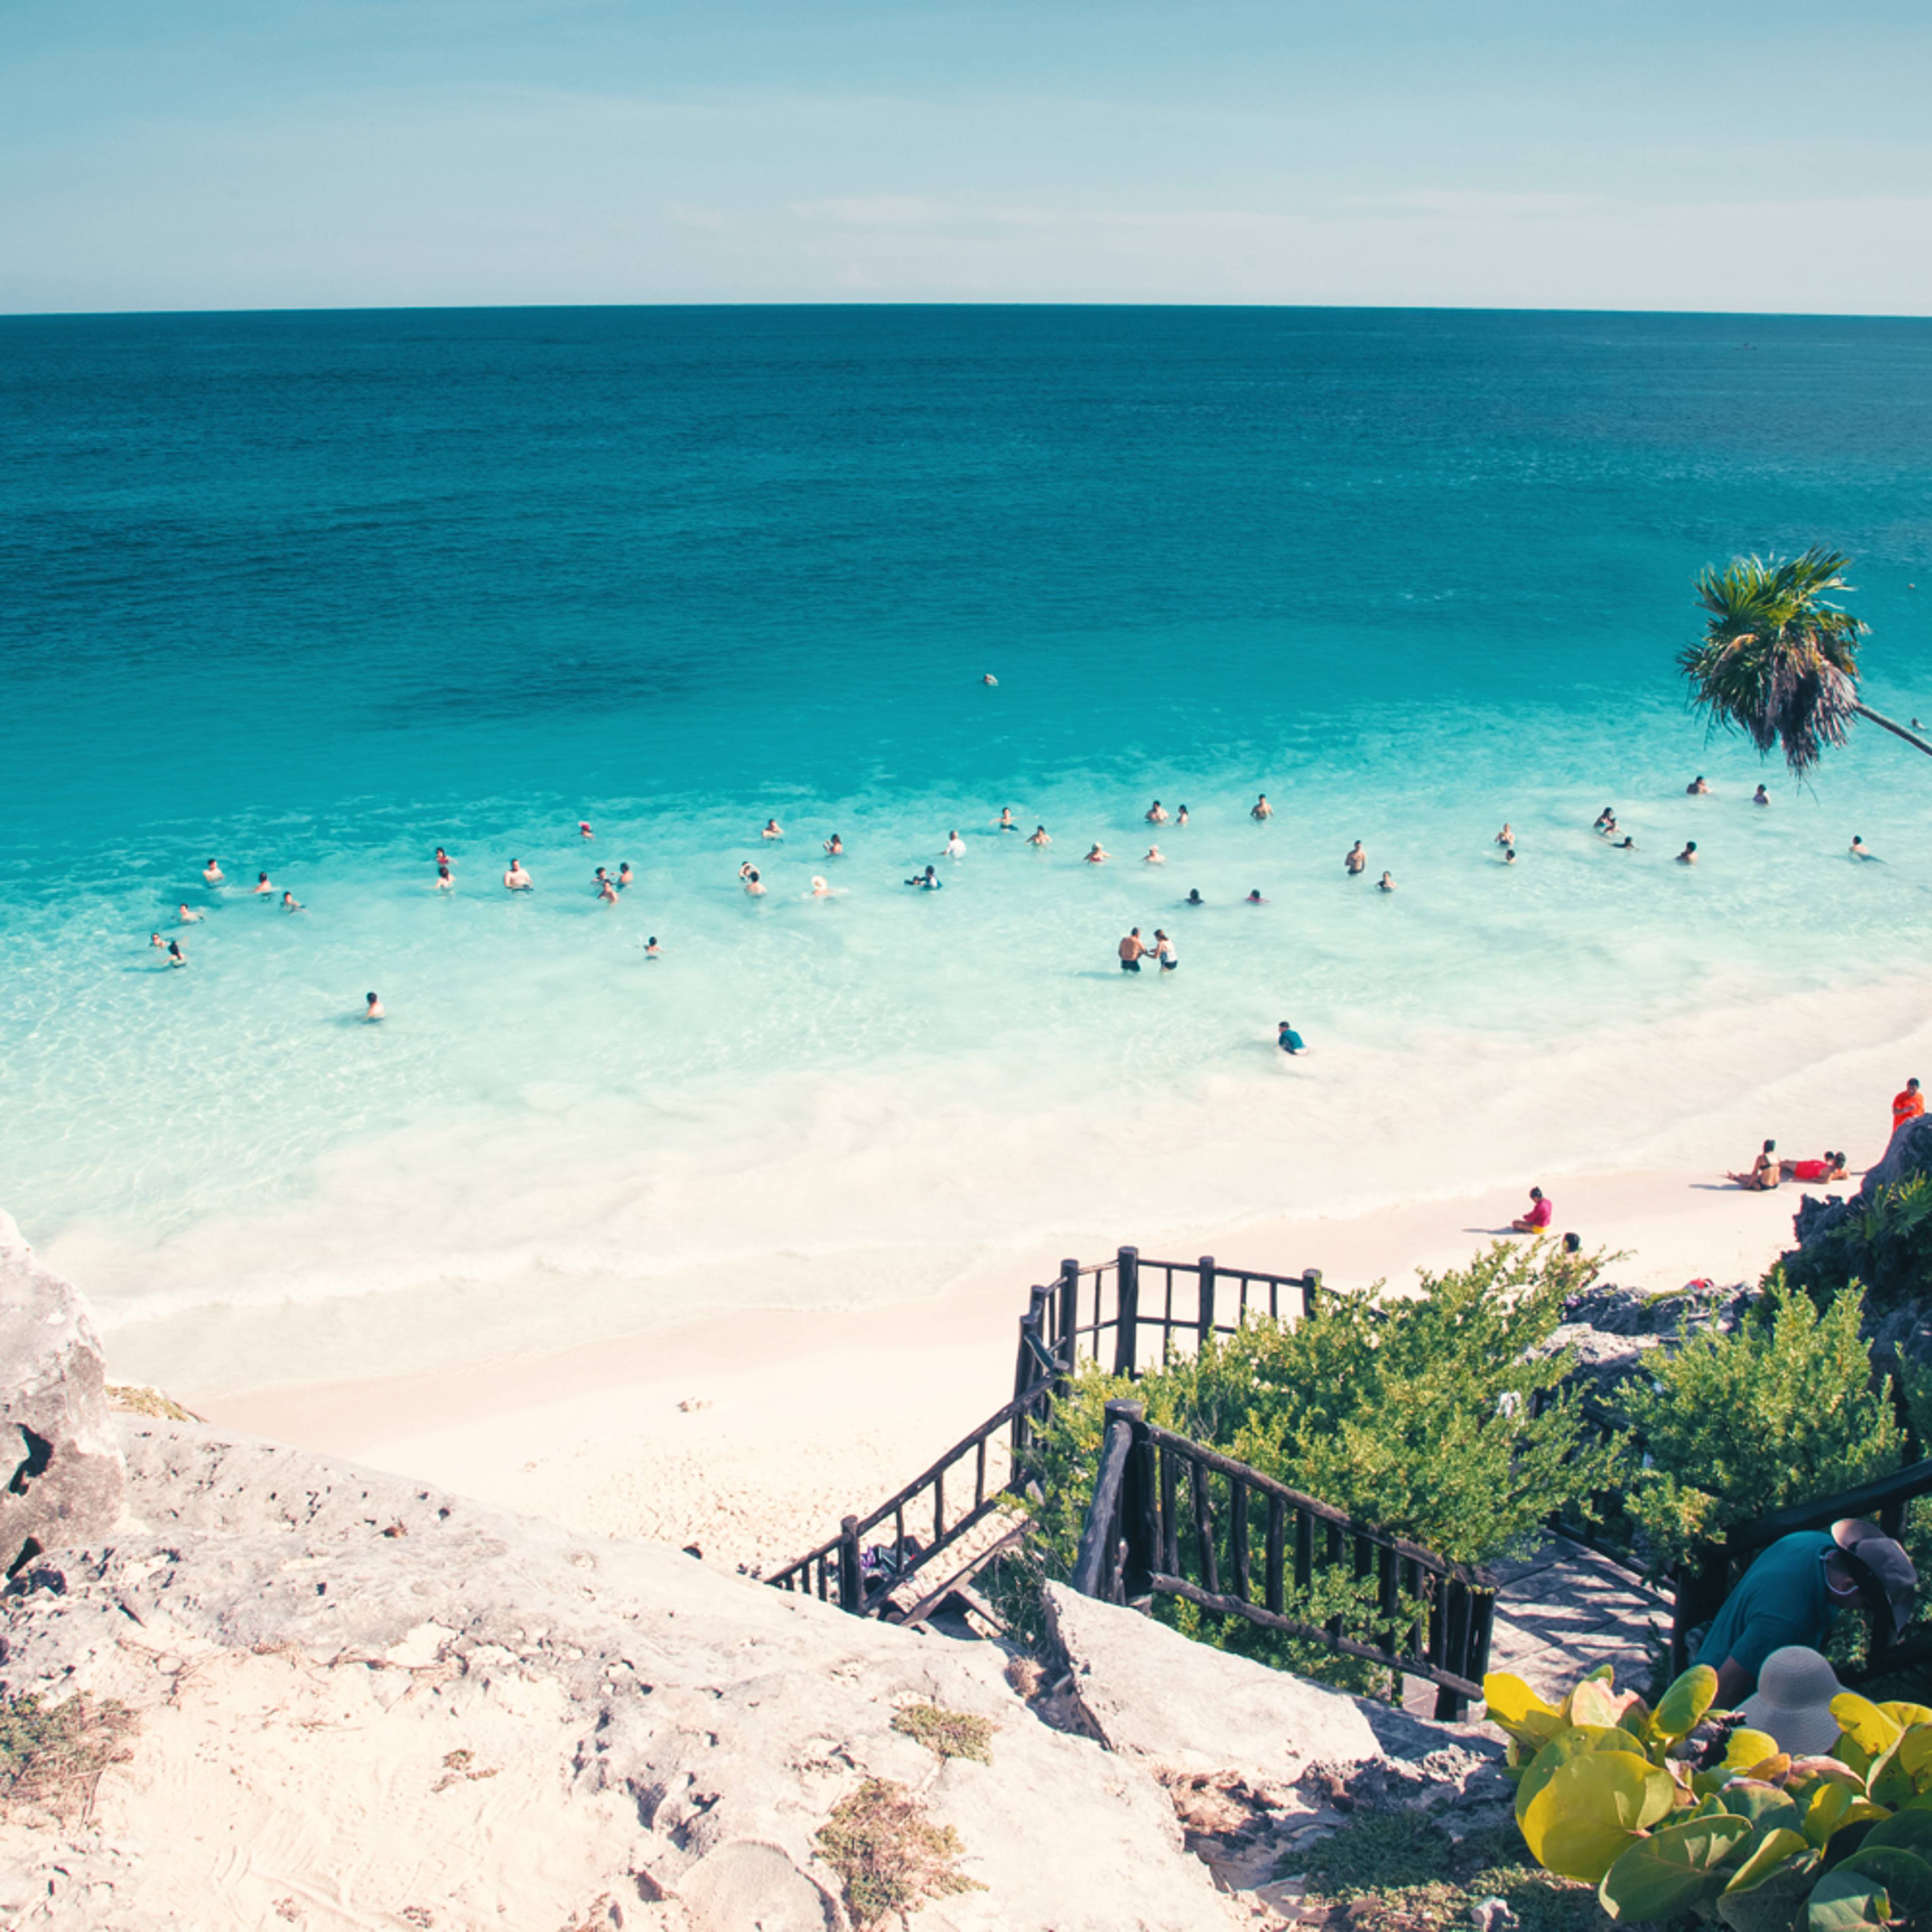 Design your perfect tour of Mexico's beaches with a local expert